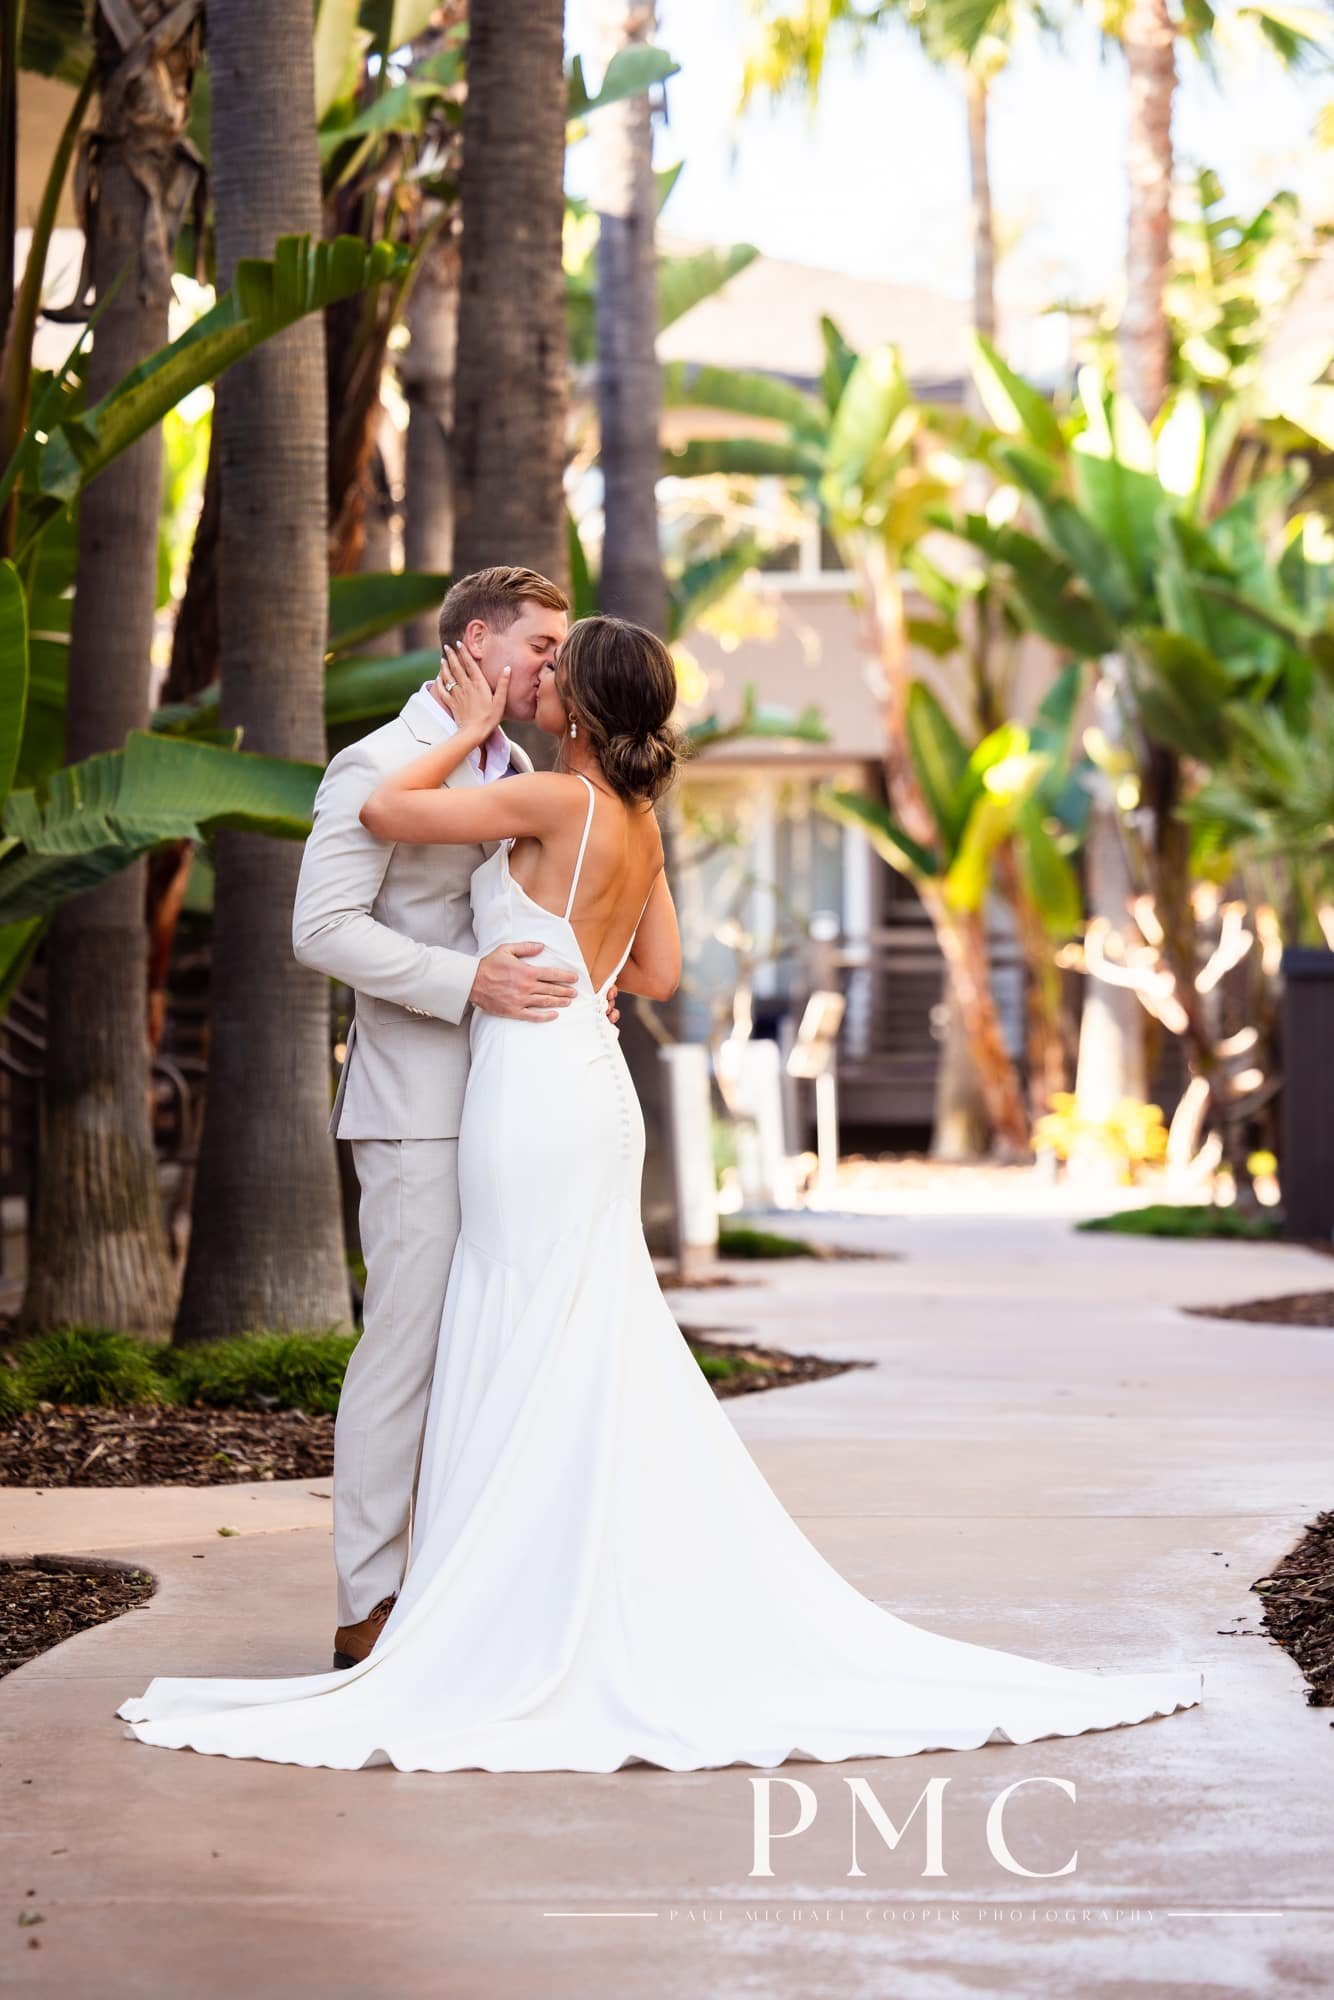 A bride and groom embrace each other in the garden area of the Hyatt Regency Mission Bay Resort.